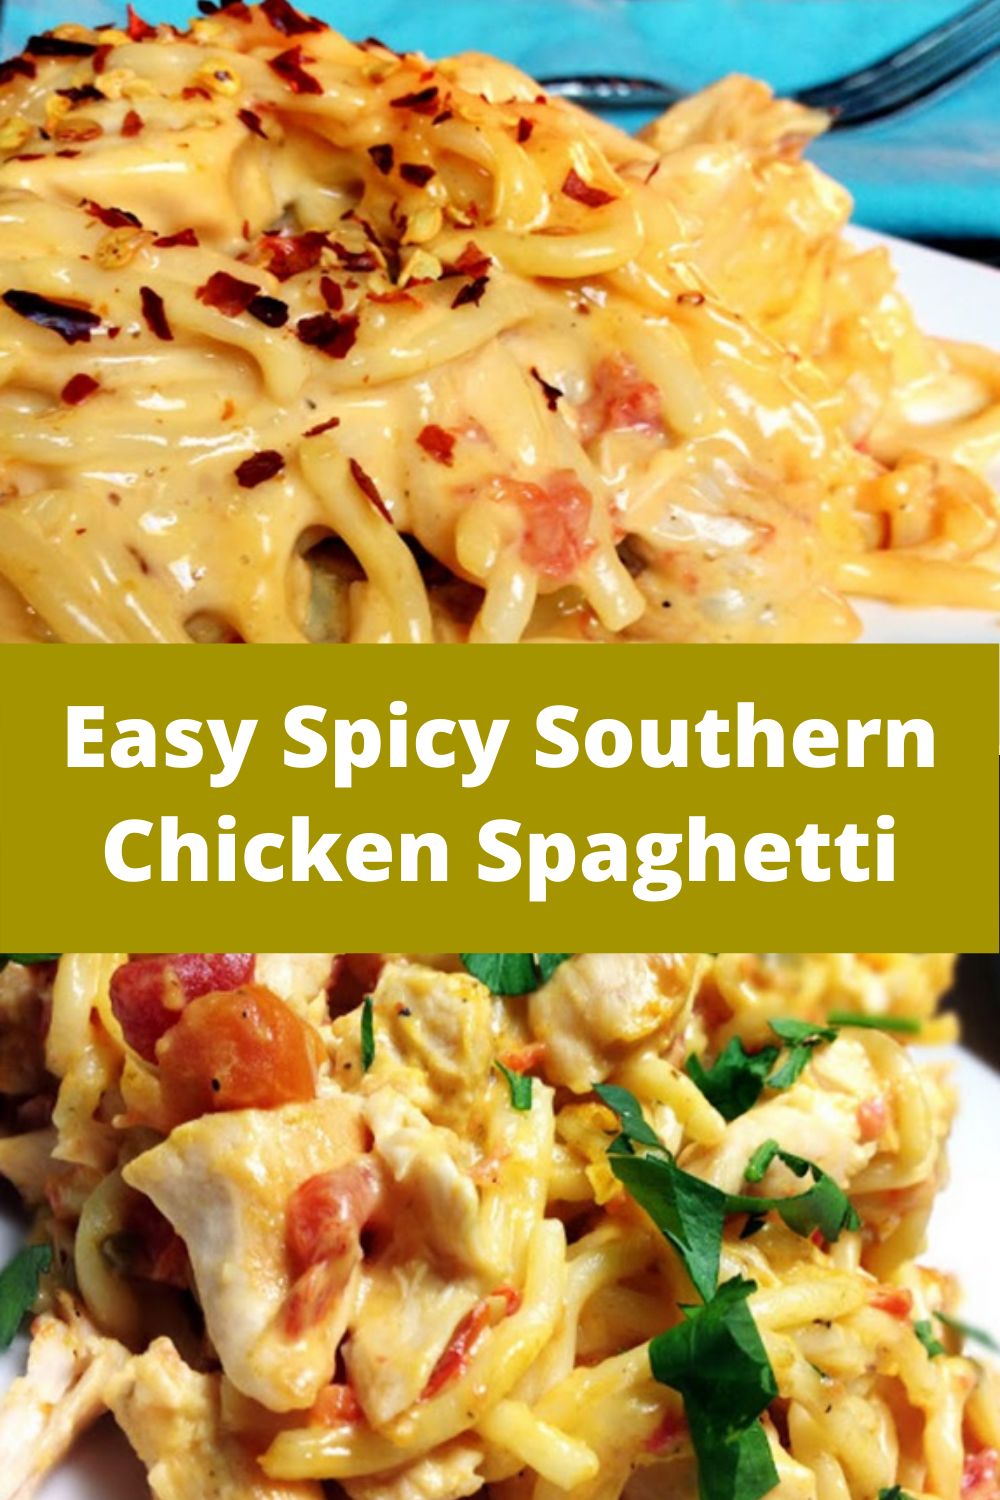 Easy Spicy Southern Chicken Spaghetti